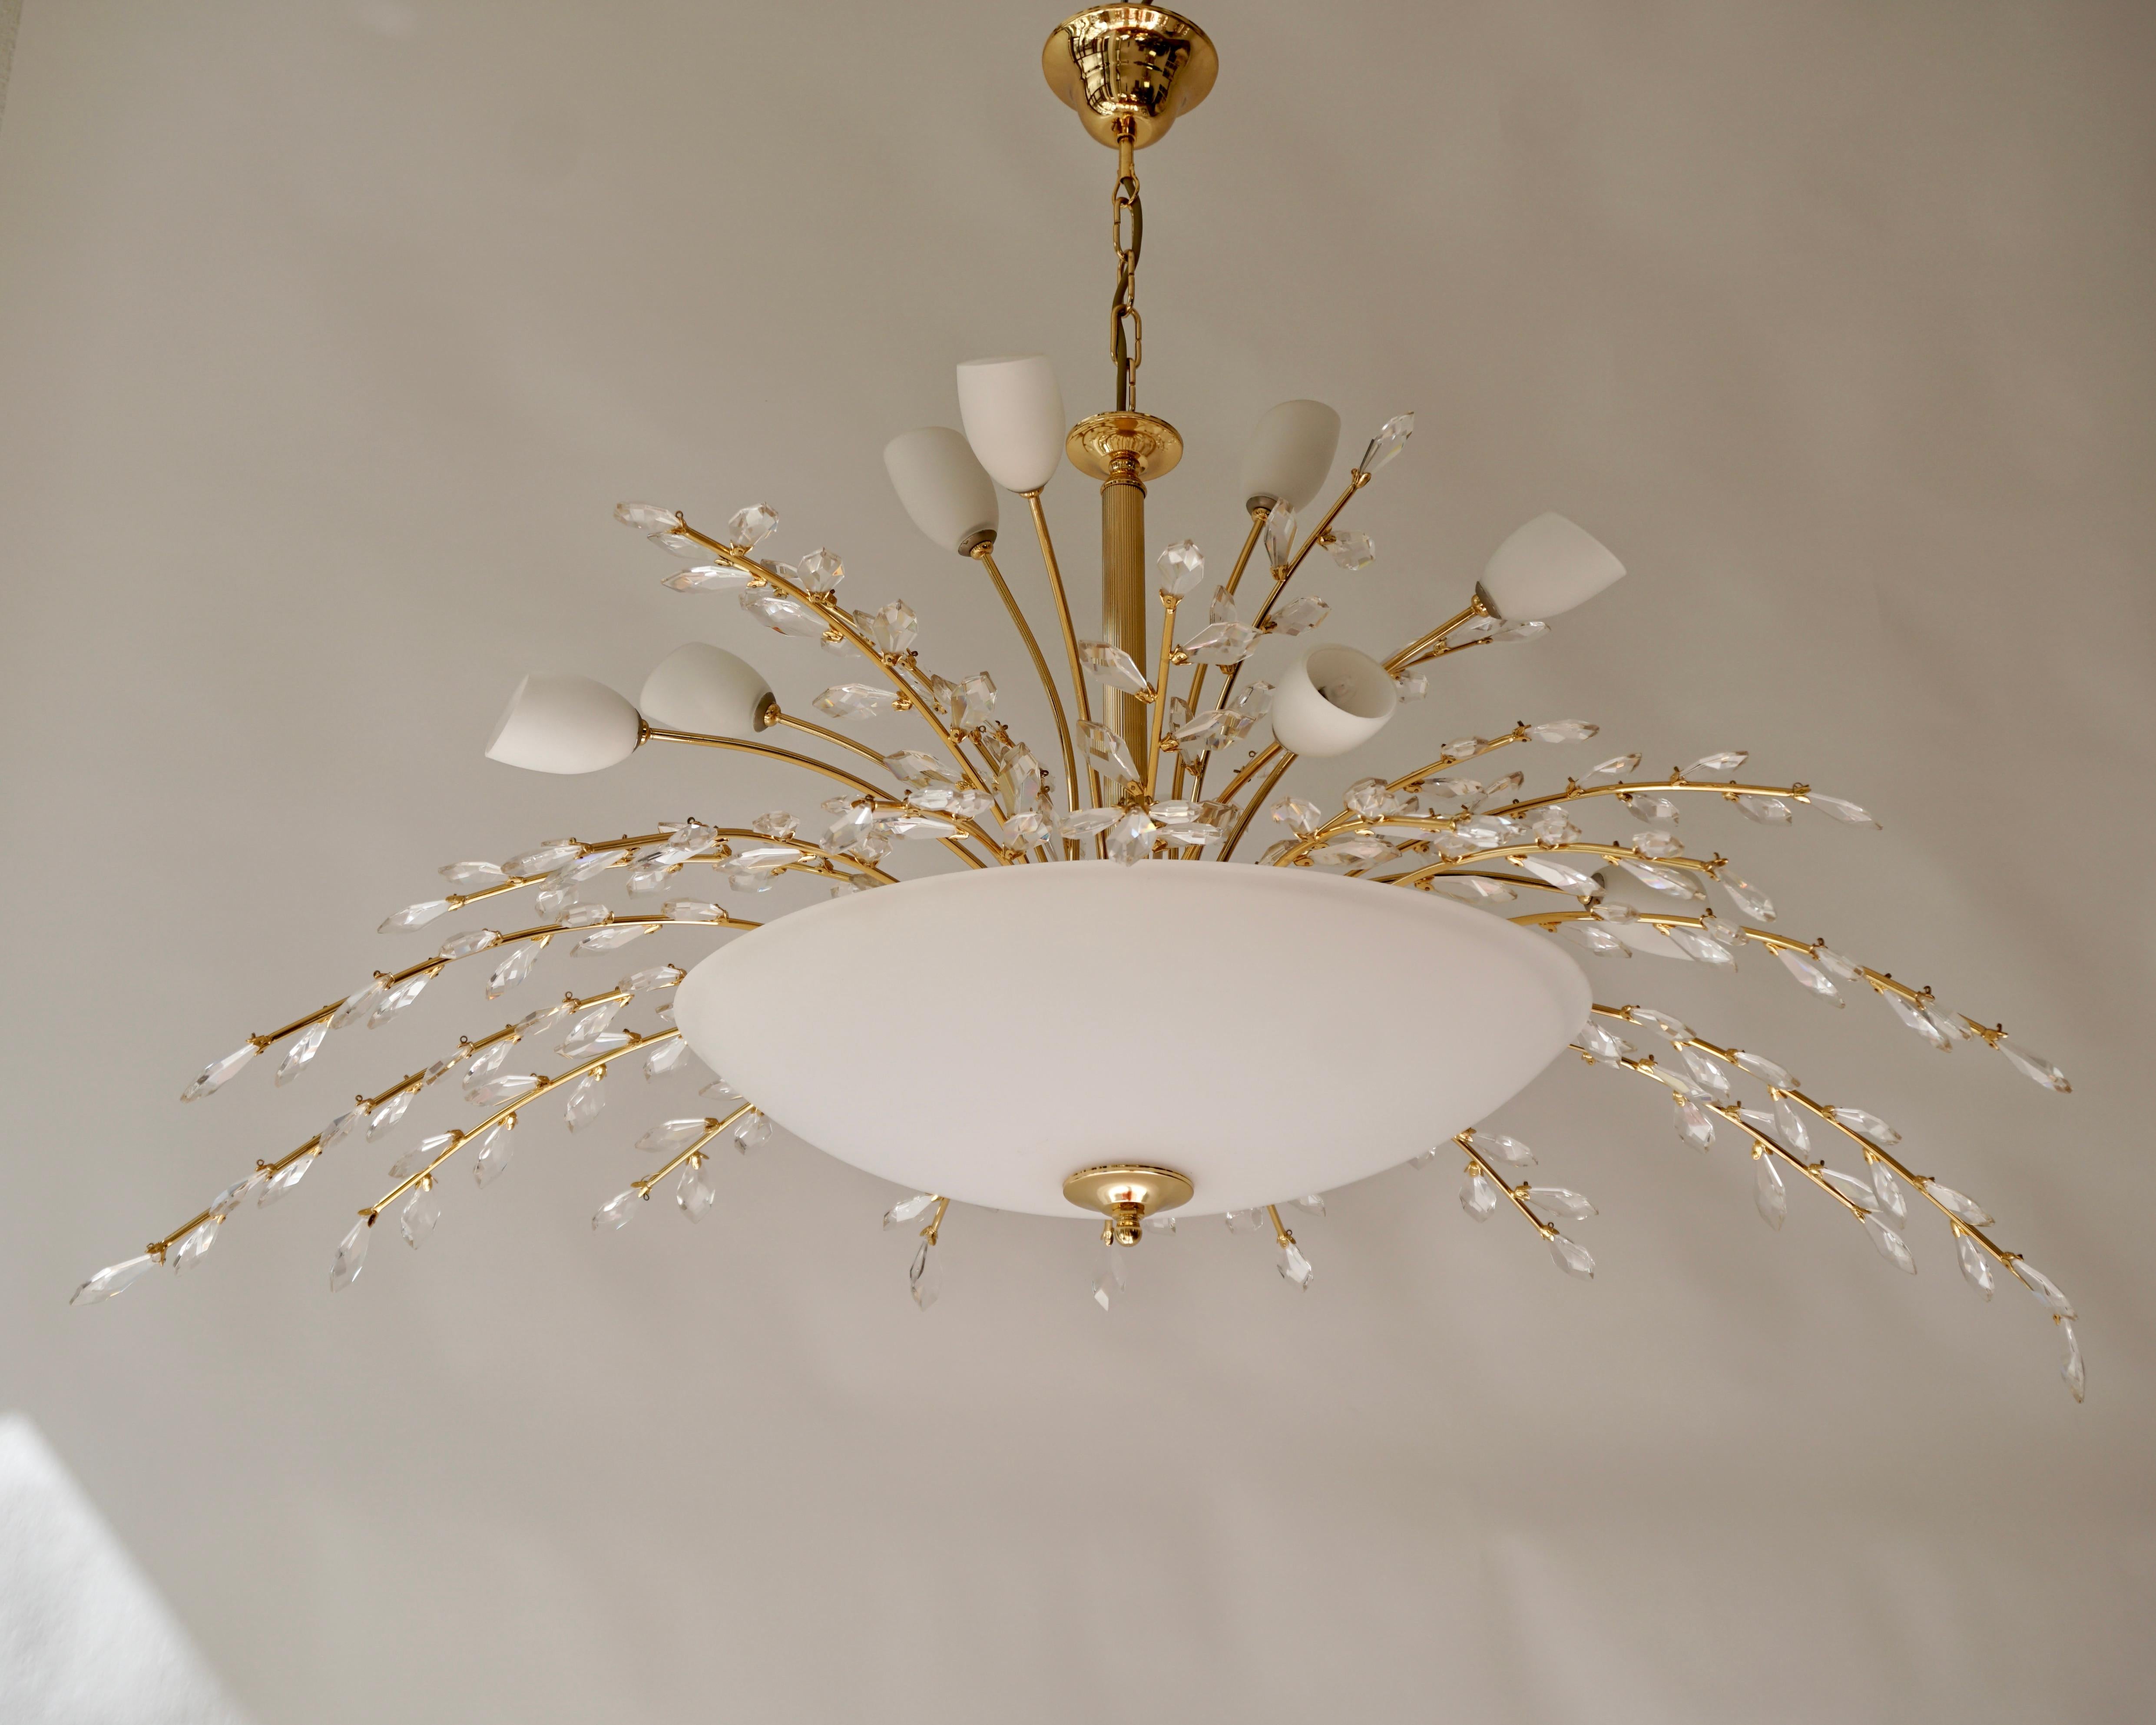 Large oval Italian chandelier is brass and opaline glass.

The chic, contemporary design of this magnificent chandelier combines traditional crafting techniques with a modern design approach. Simple and elegant lines create an oval silhouette